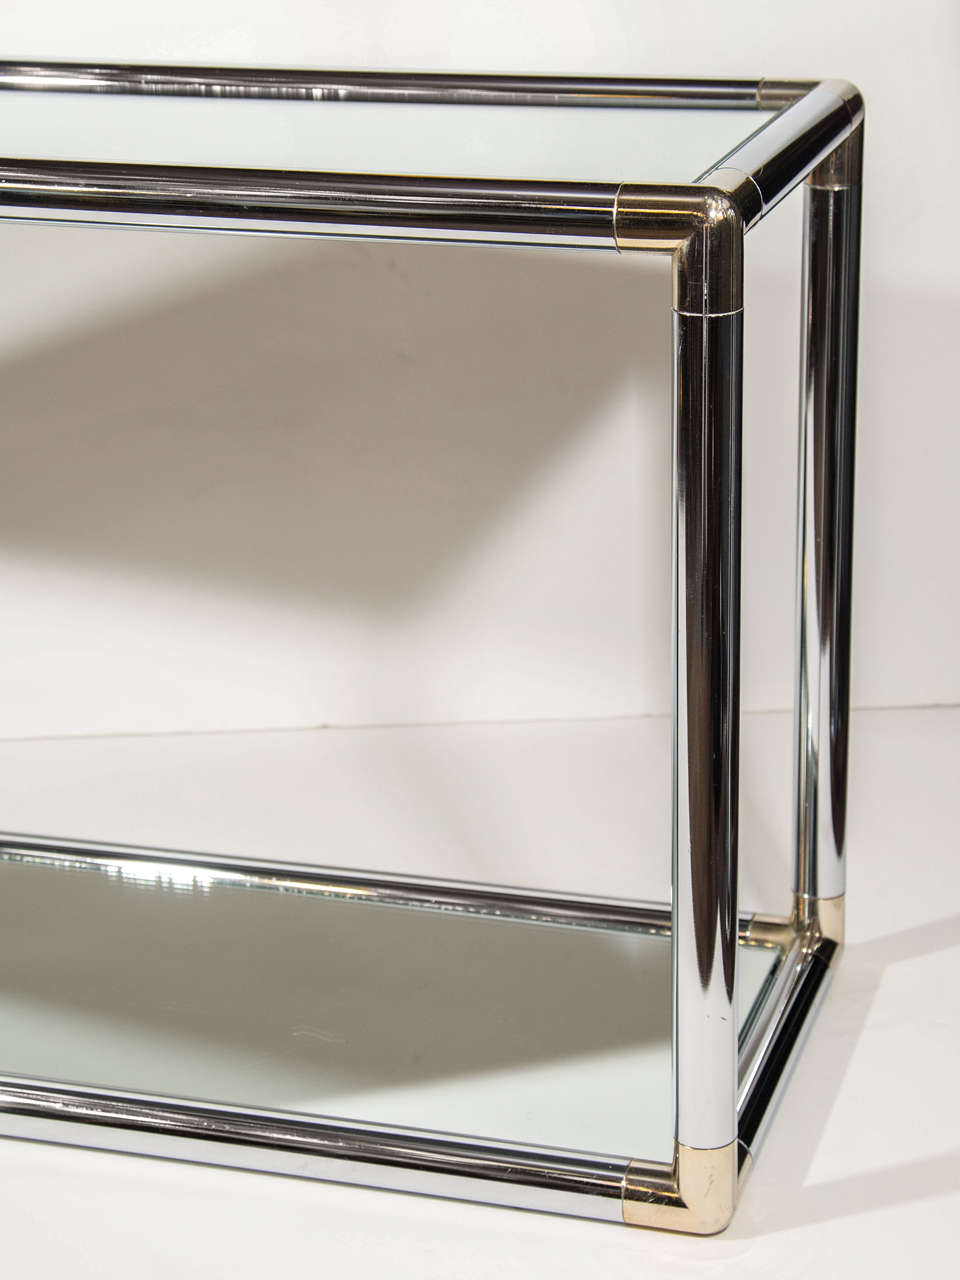 Polished Mid-Century Modern Chrome and Mirror Two-Tier Console Table, Italy c. 1970's For Sale